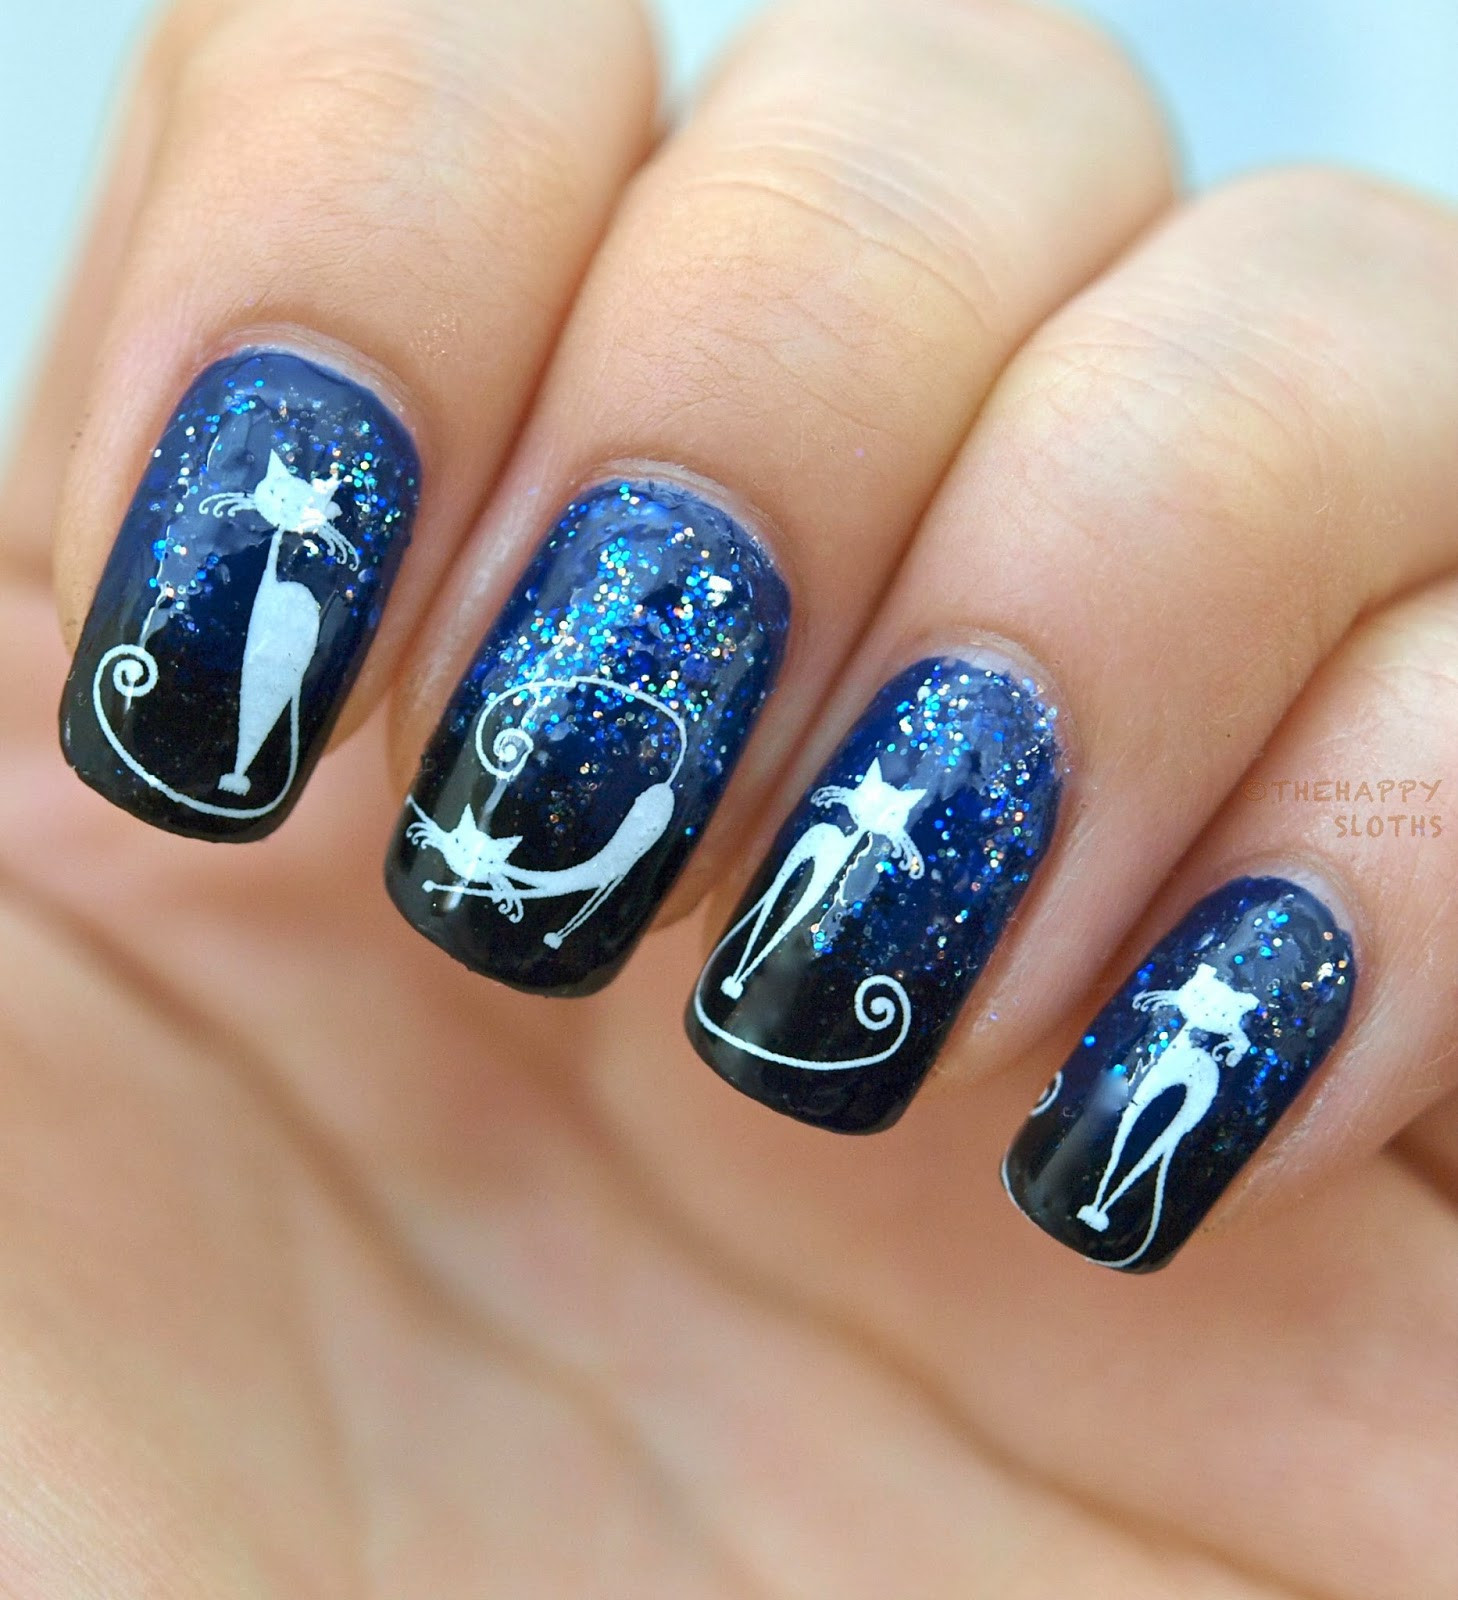 Cat Nail Designs
 The Midnight Cats Halloween Manicure Design